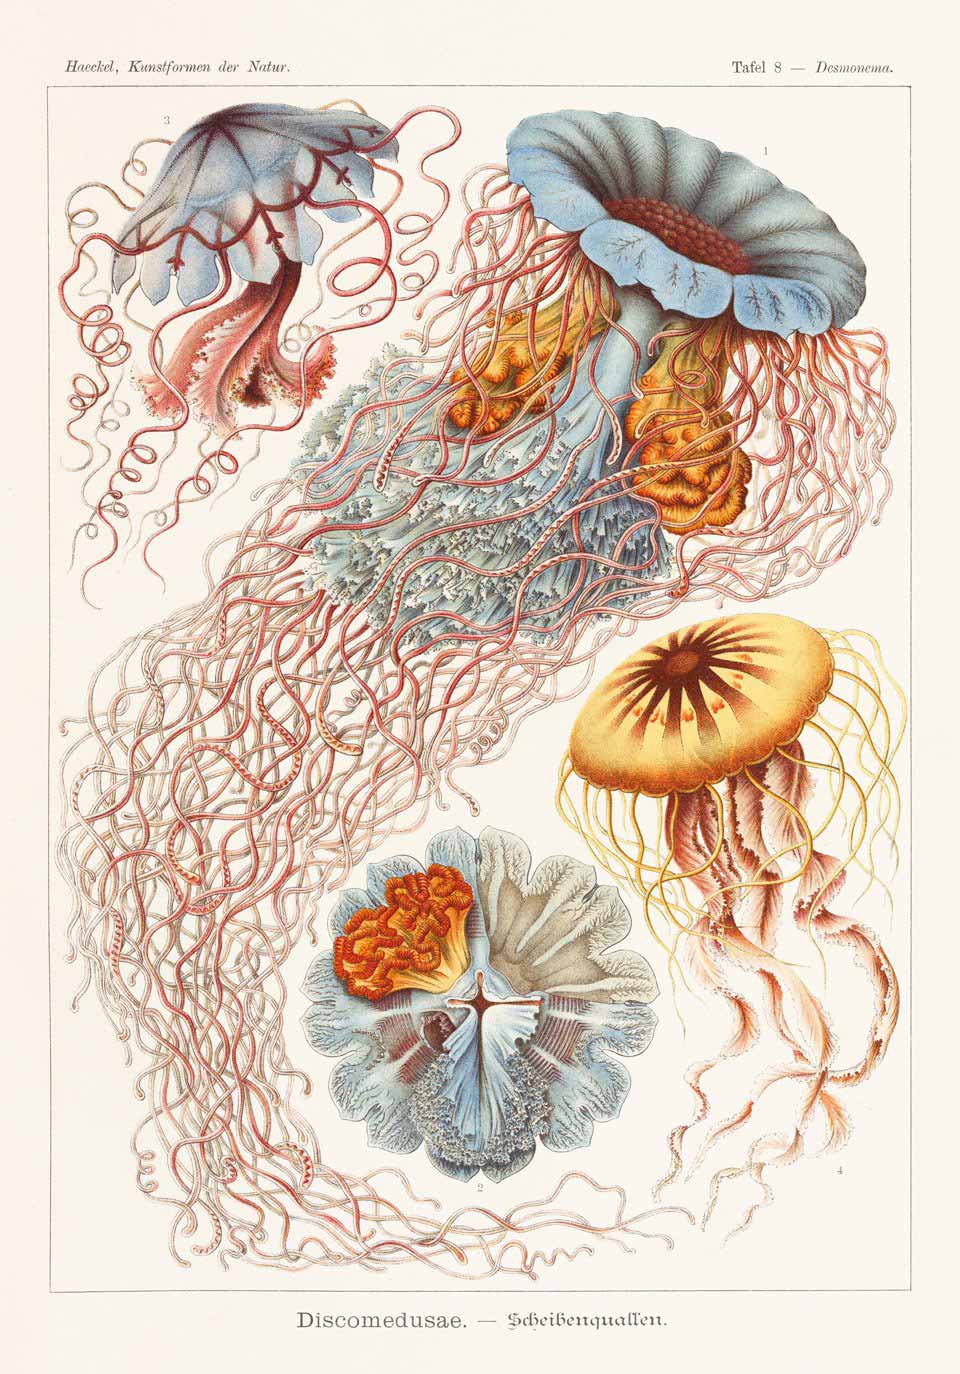 From Art Forms in Nature, plate 8, 1899–1904; Desmonema annasethe, the jellyfish that Haeckel named after his late wife Anna Sethe